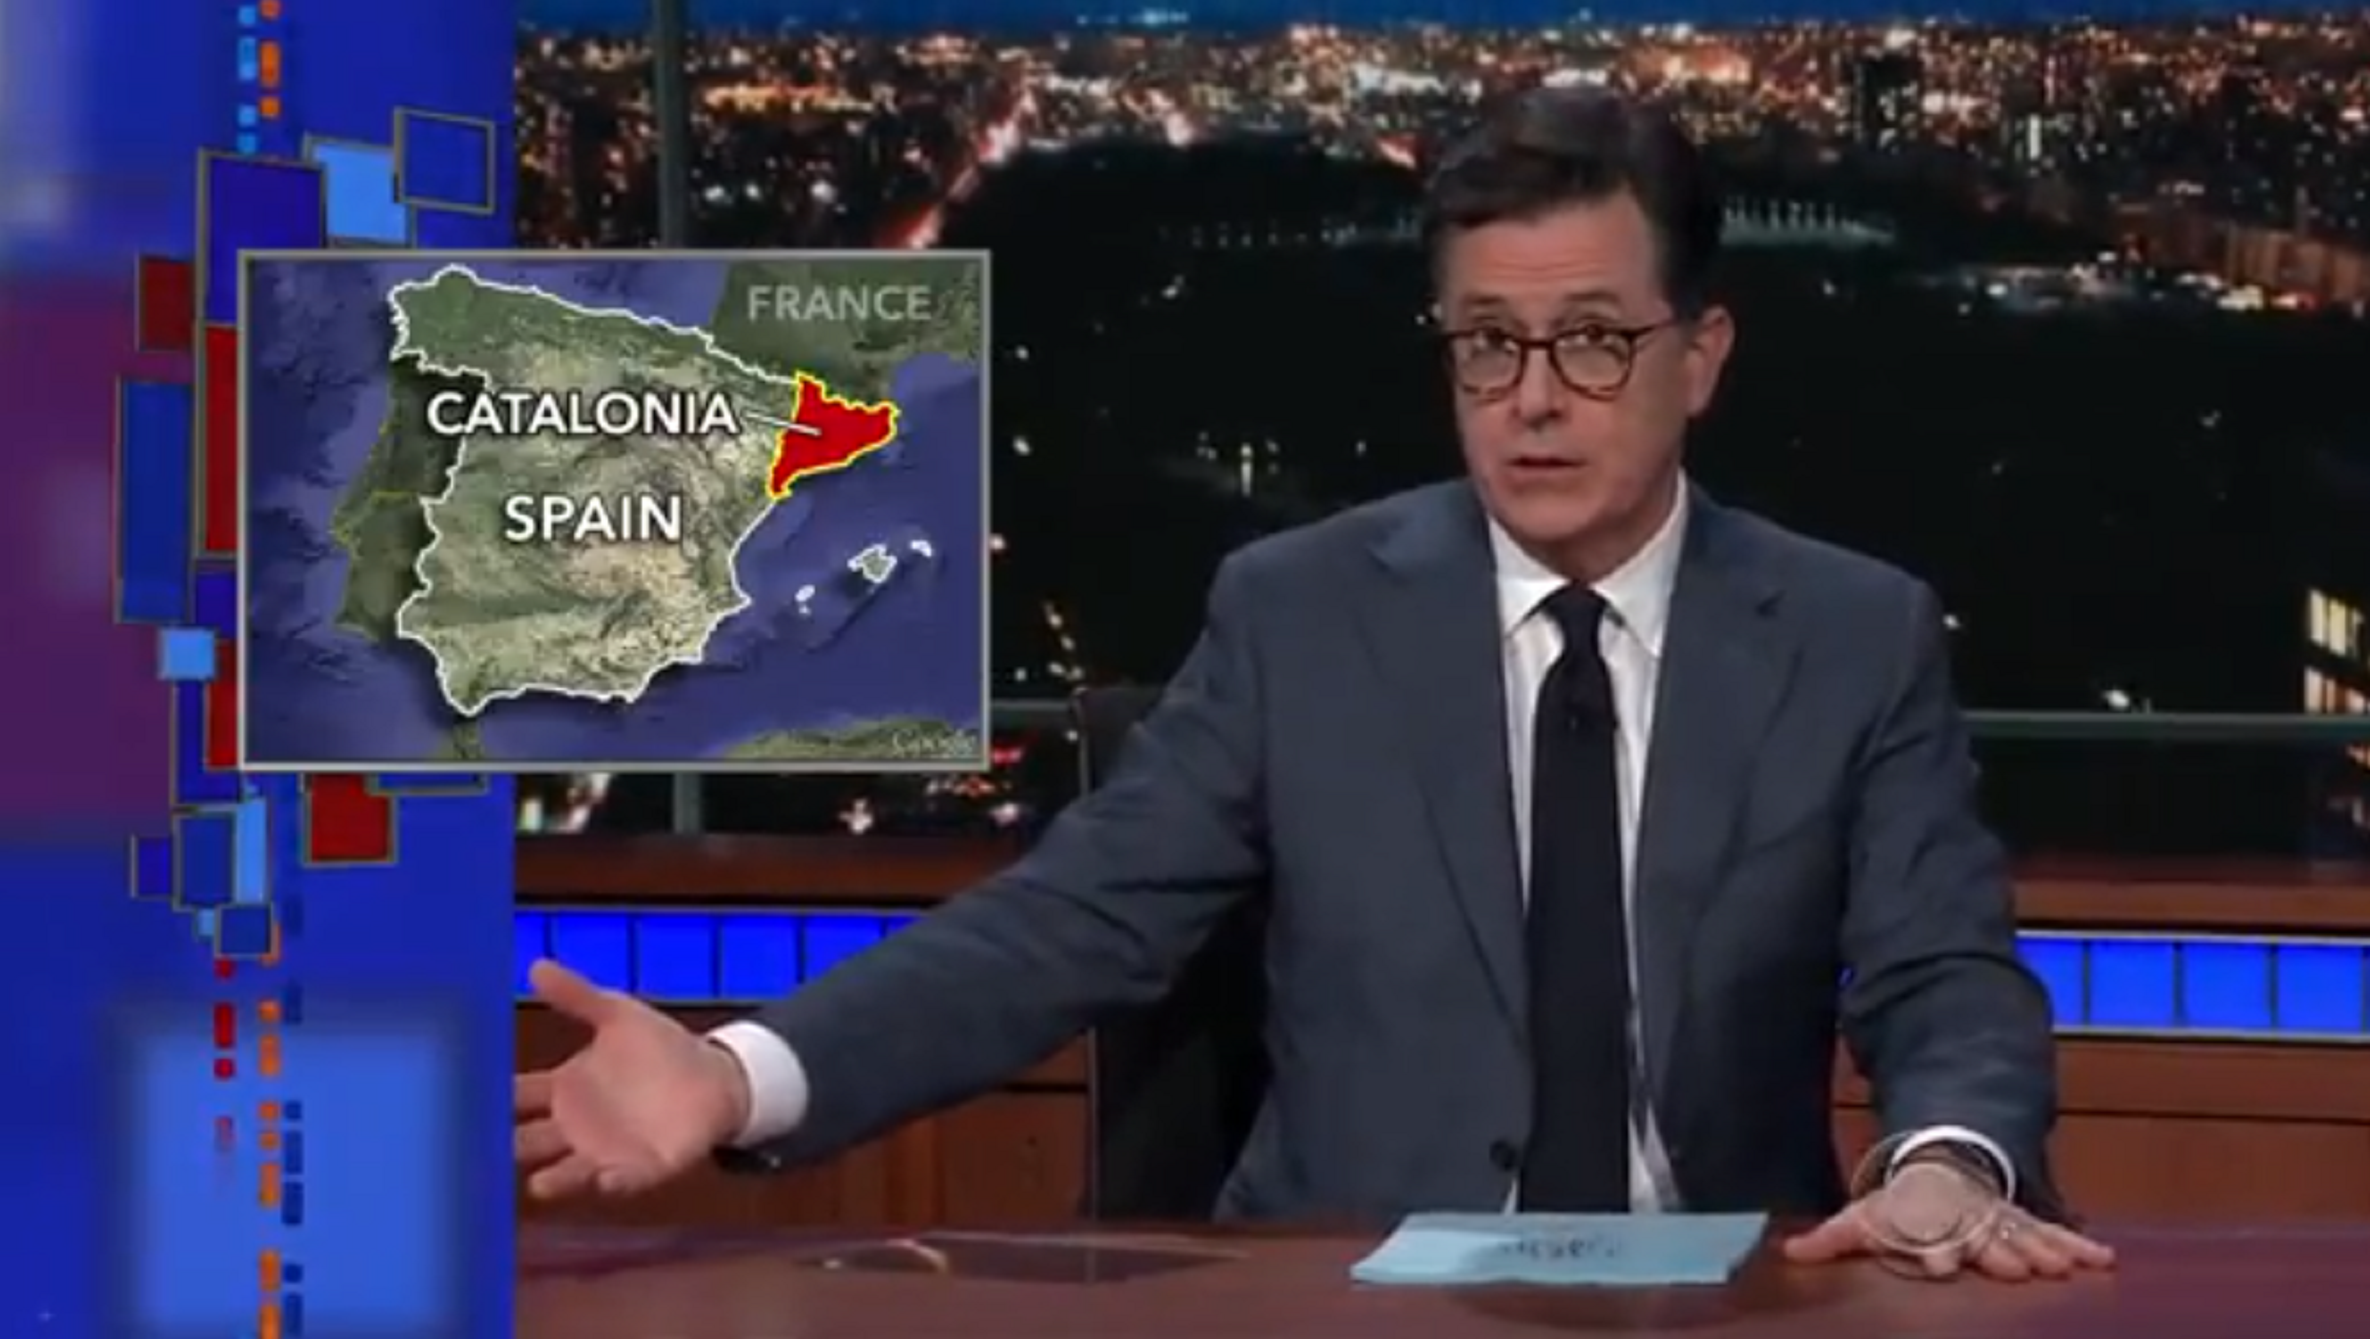 Stephen Colbert takes on the Catalonia issue